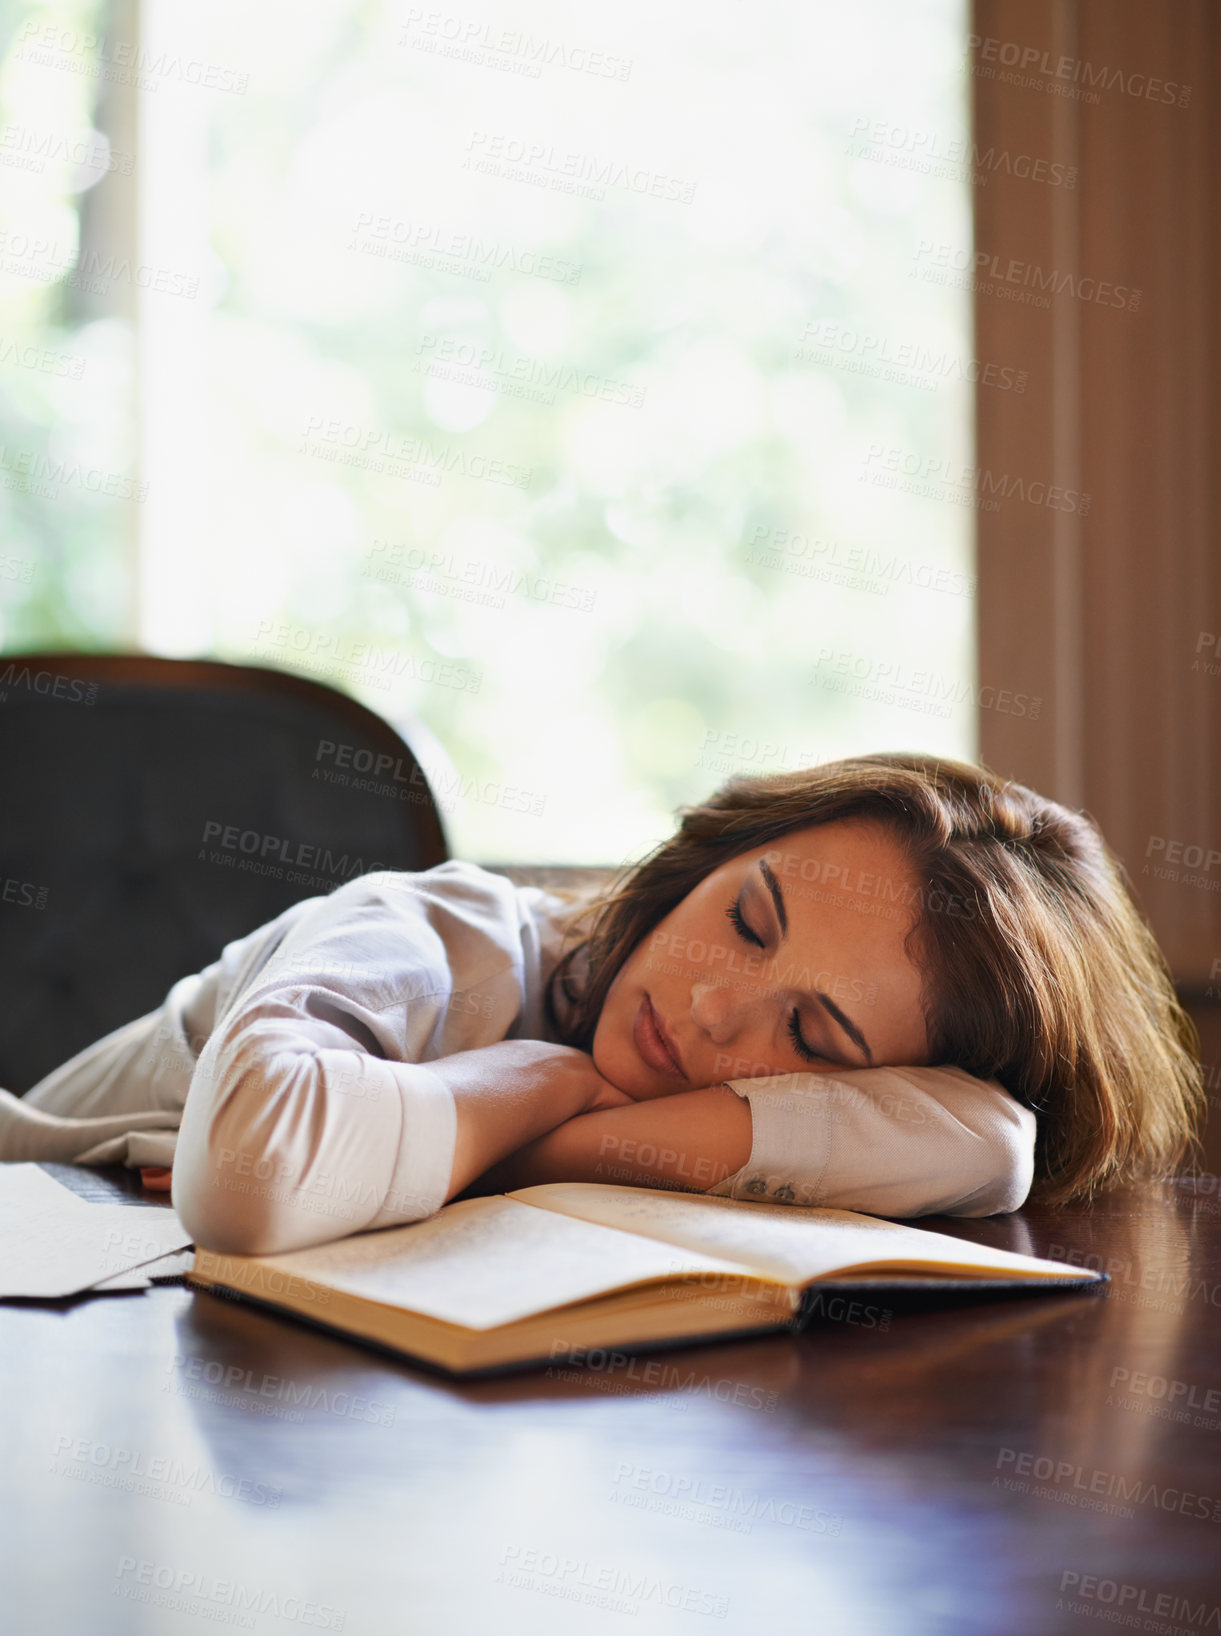 Buy stock photo Sleep, remote worker and tired woman with books, fatigue or snooze while writing in home office. Freelance, burnout or female writer nap in a house exhausted by reading, research or novel notes